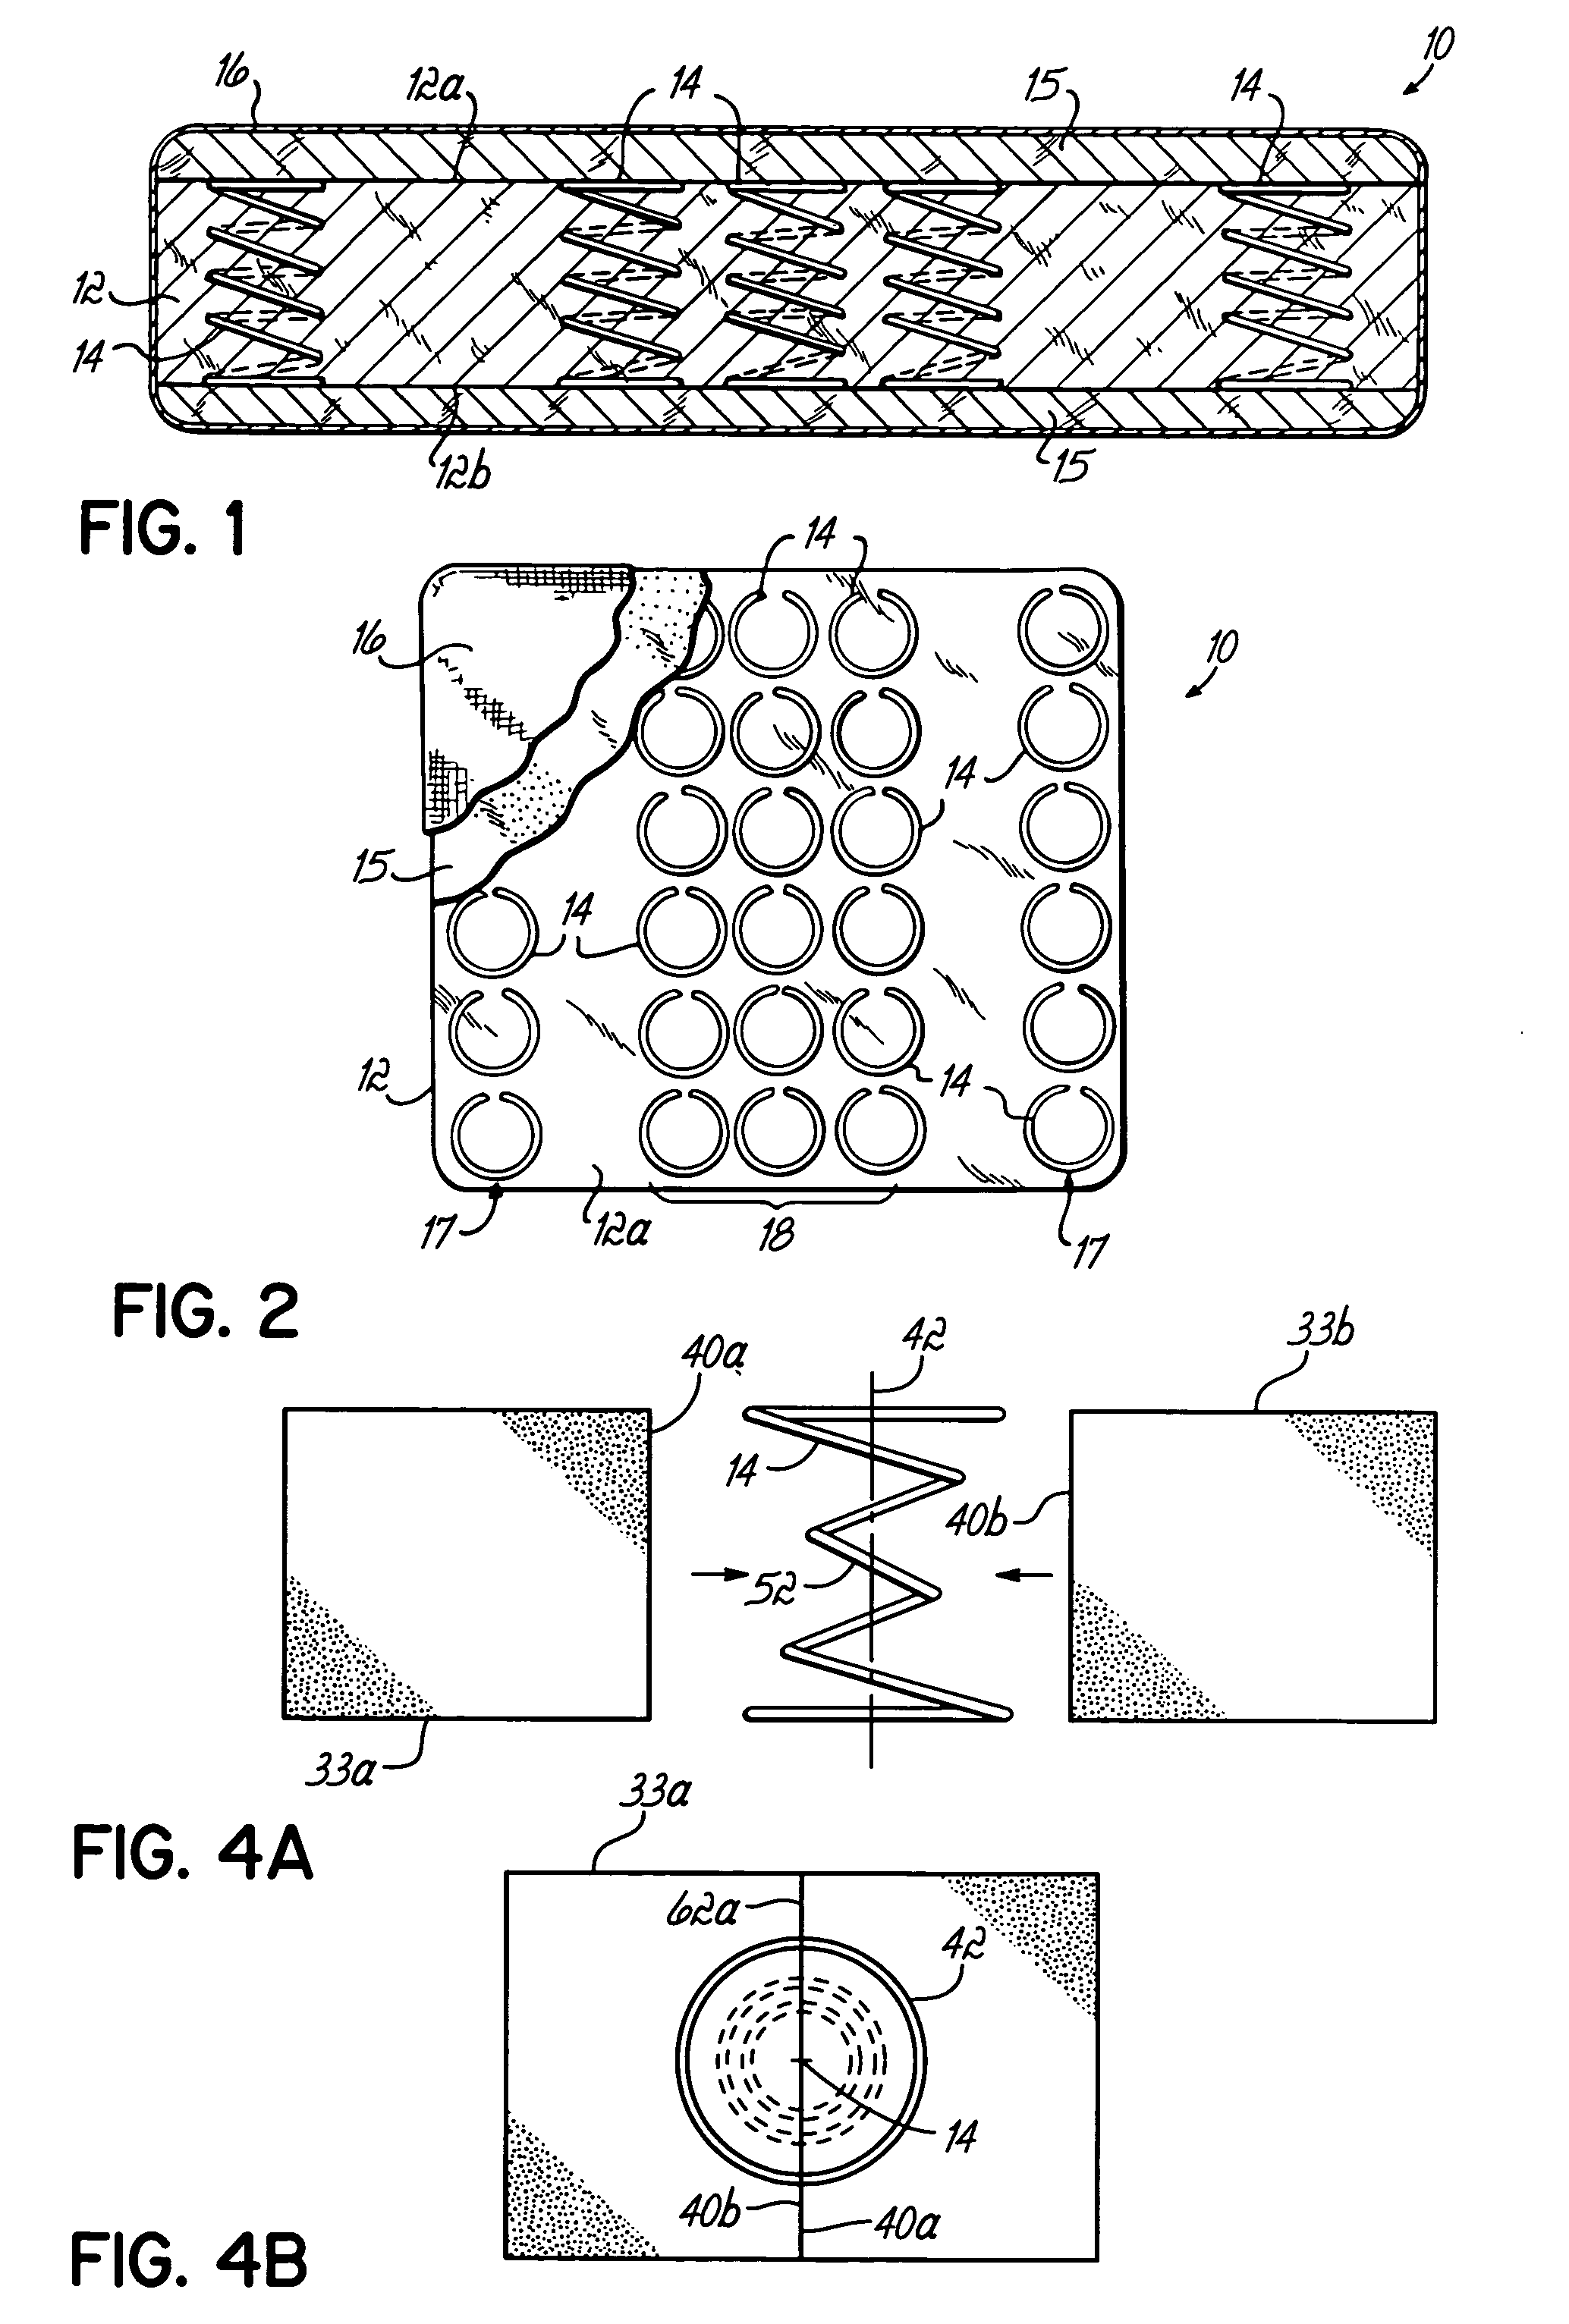 Method of making resilient structure including inserting heated coil spring through side surface of fiber batt